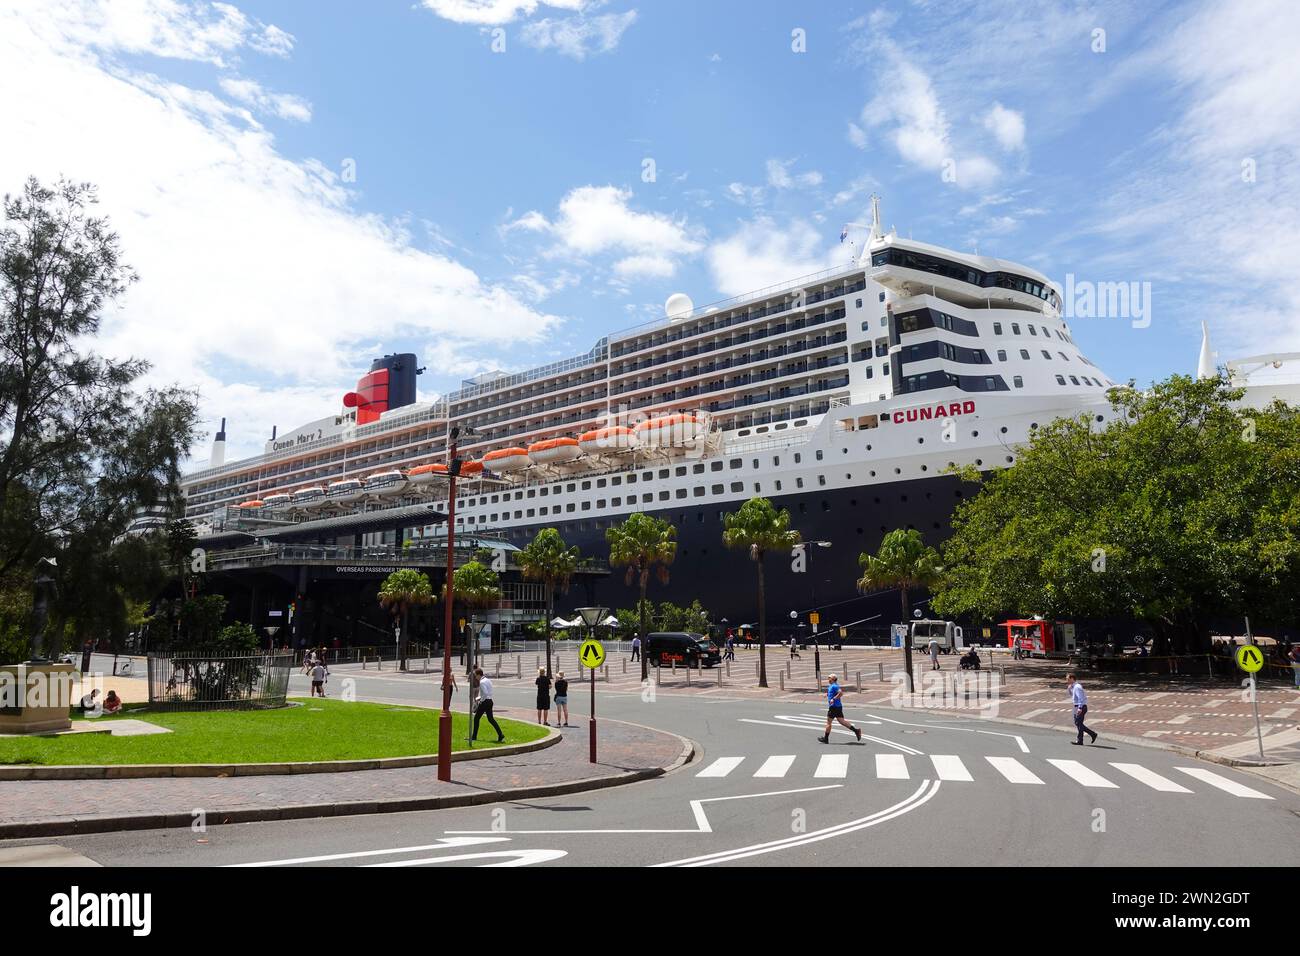 Cruise ship at Sydney Harbour on a sunny day Stock Photo